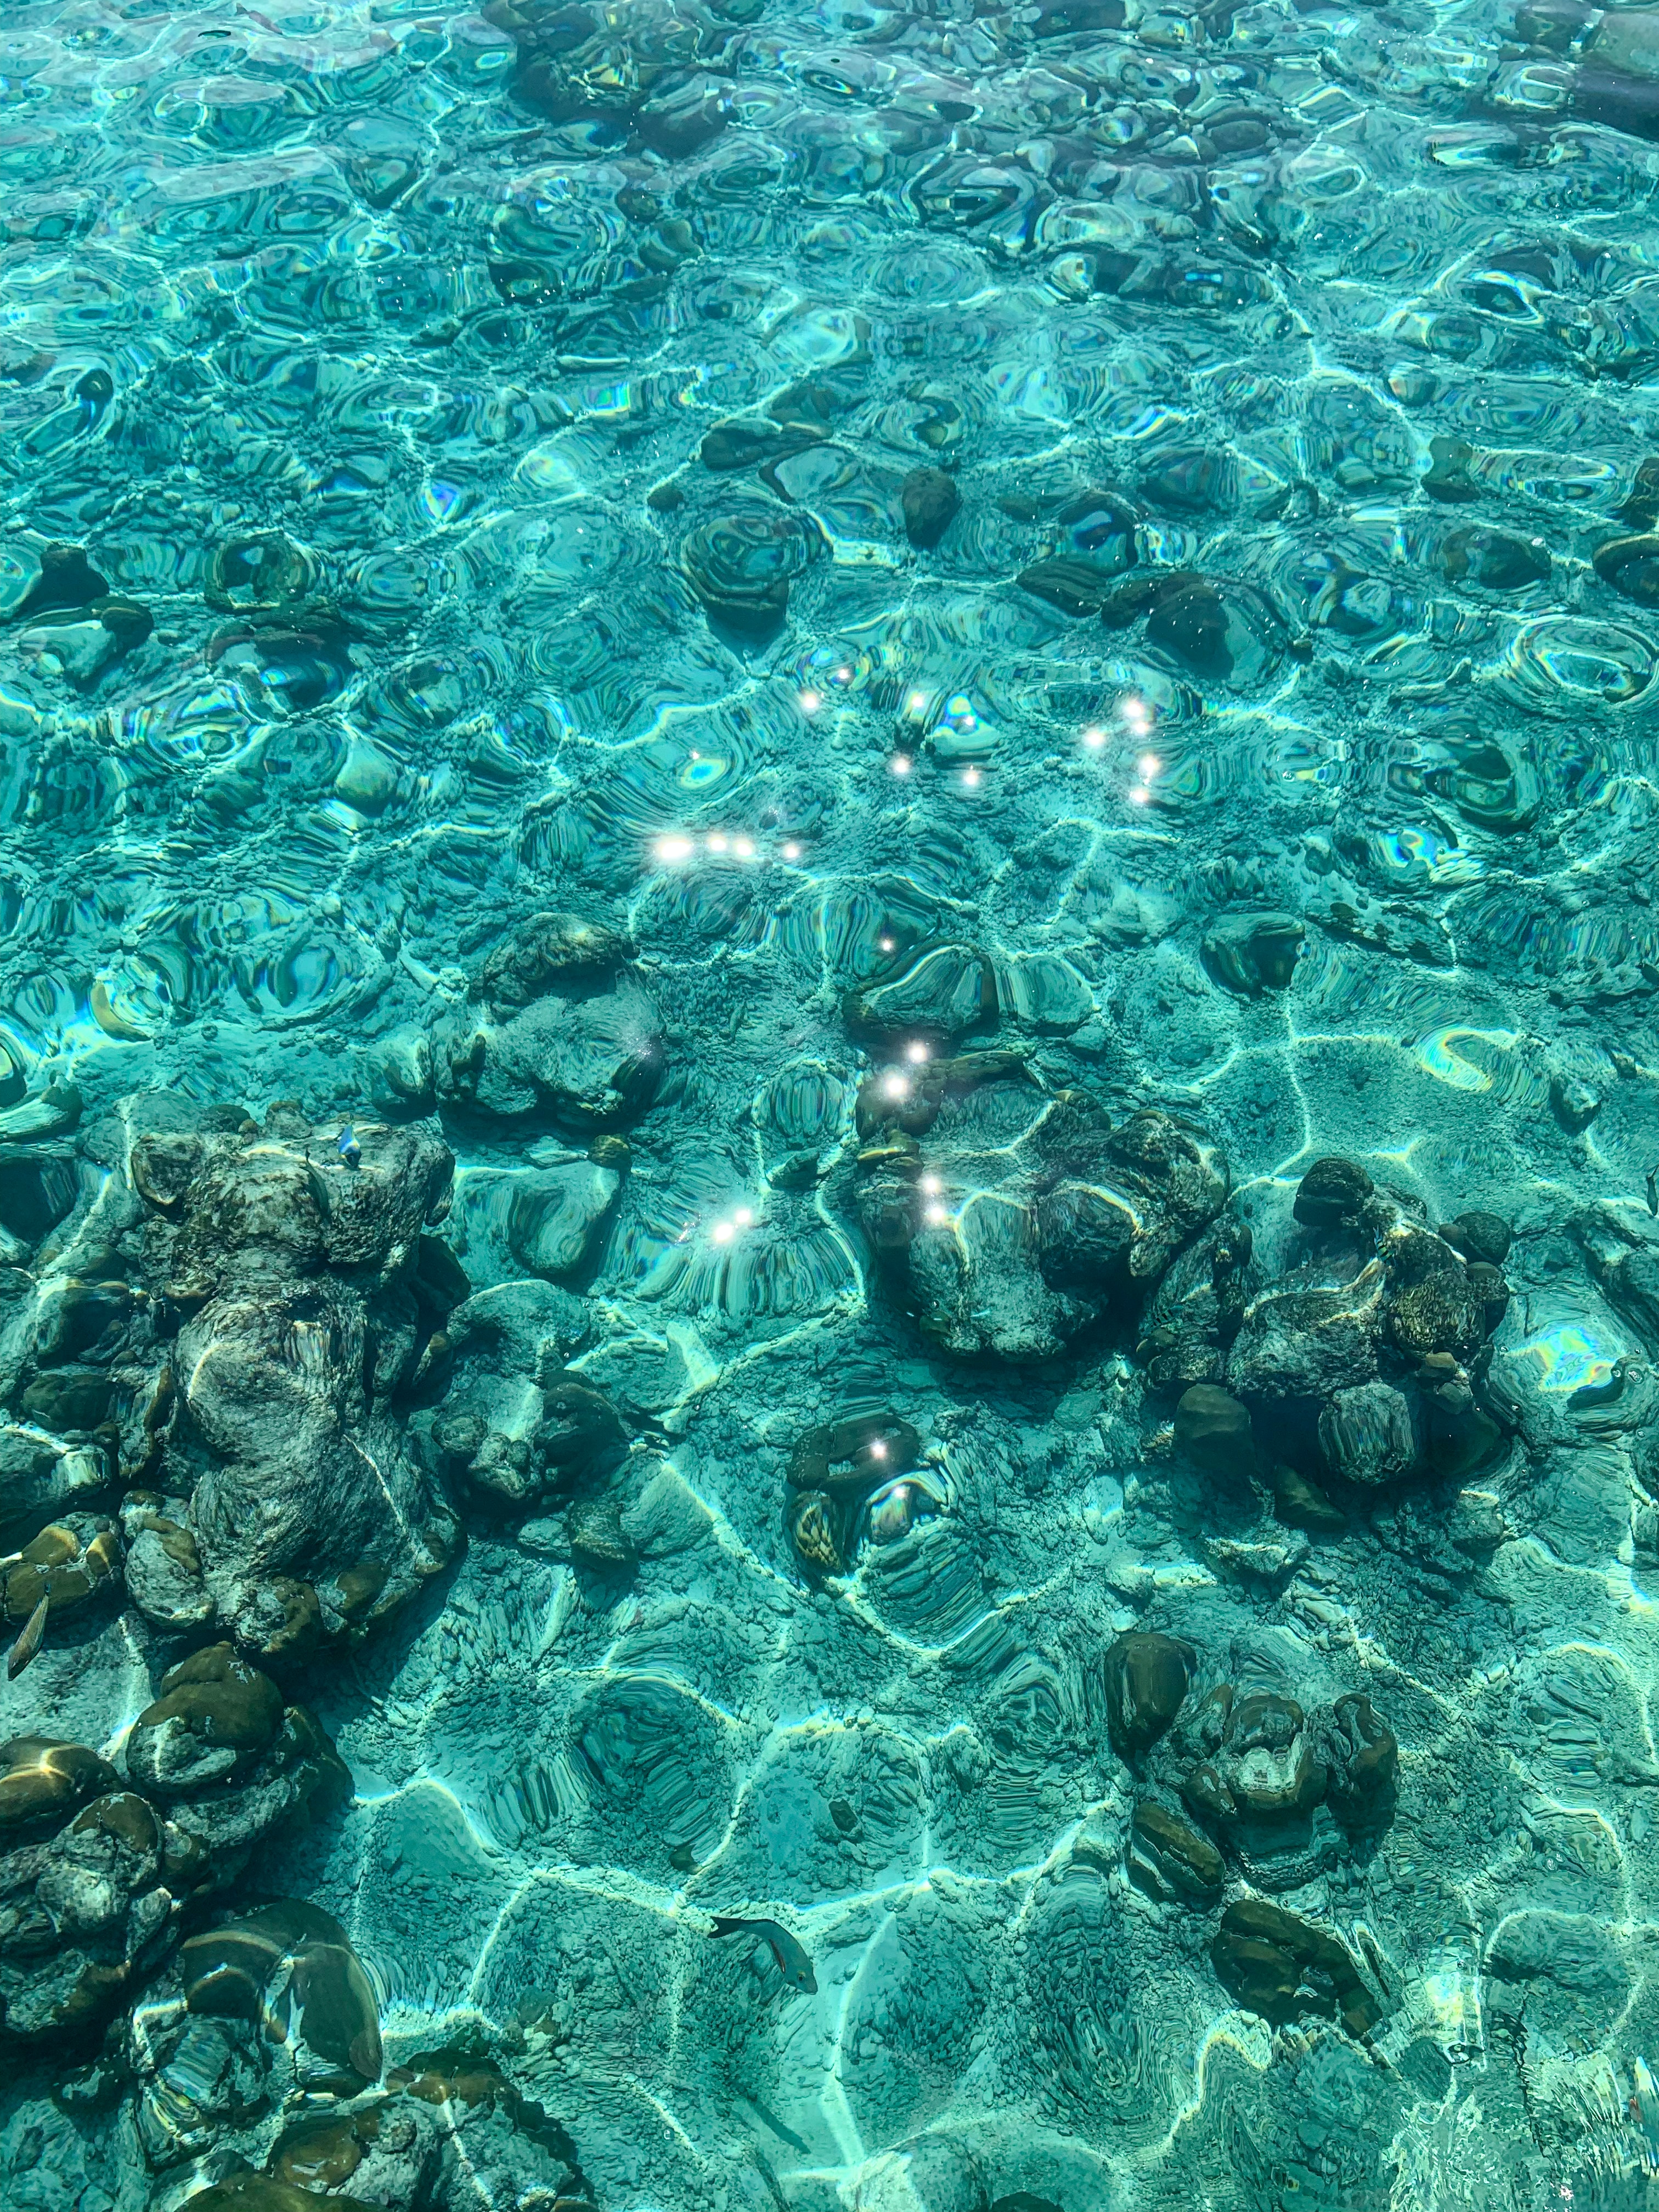 Turquoise sea floor with reflections from waves